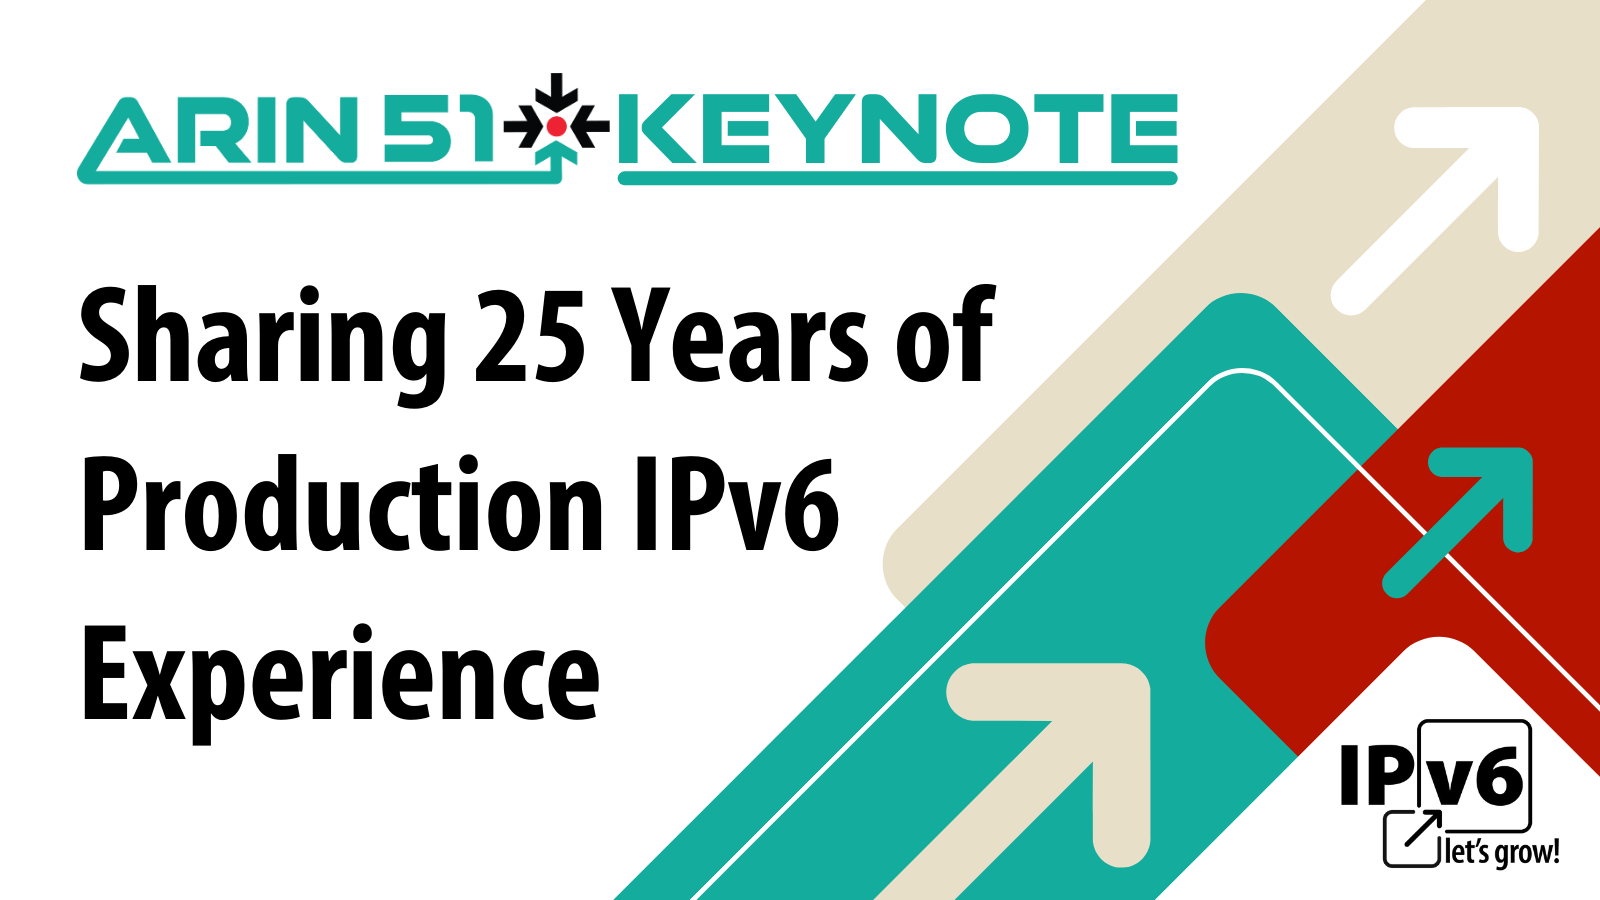 Read the blog ARIN 51 Keynote Address Shares 25 Years of Production IPv6 Experience